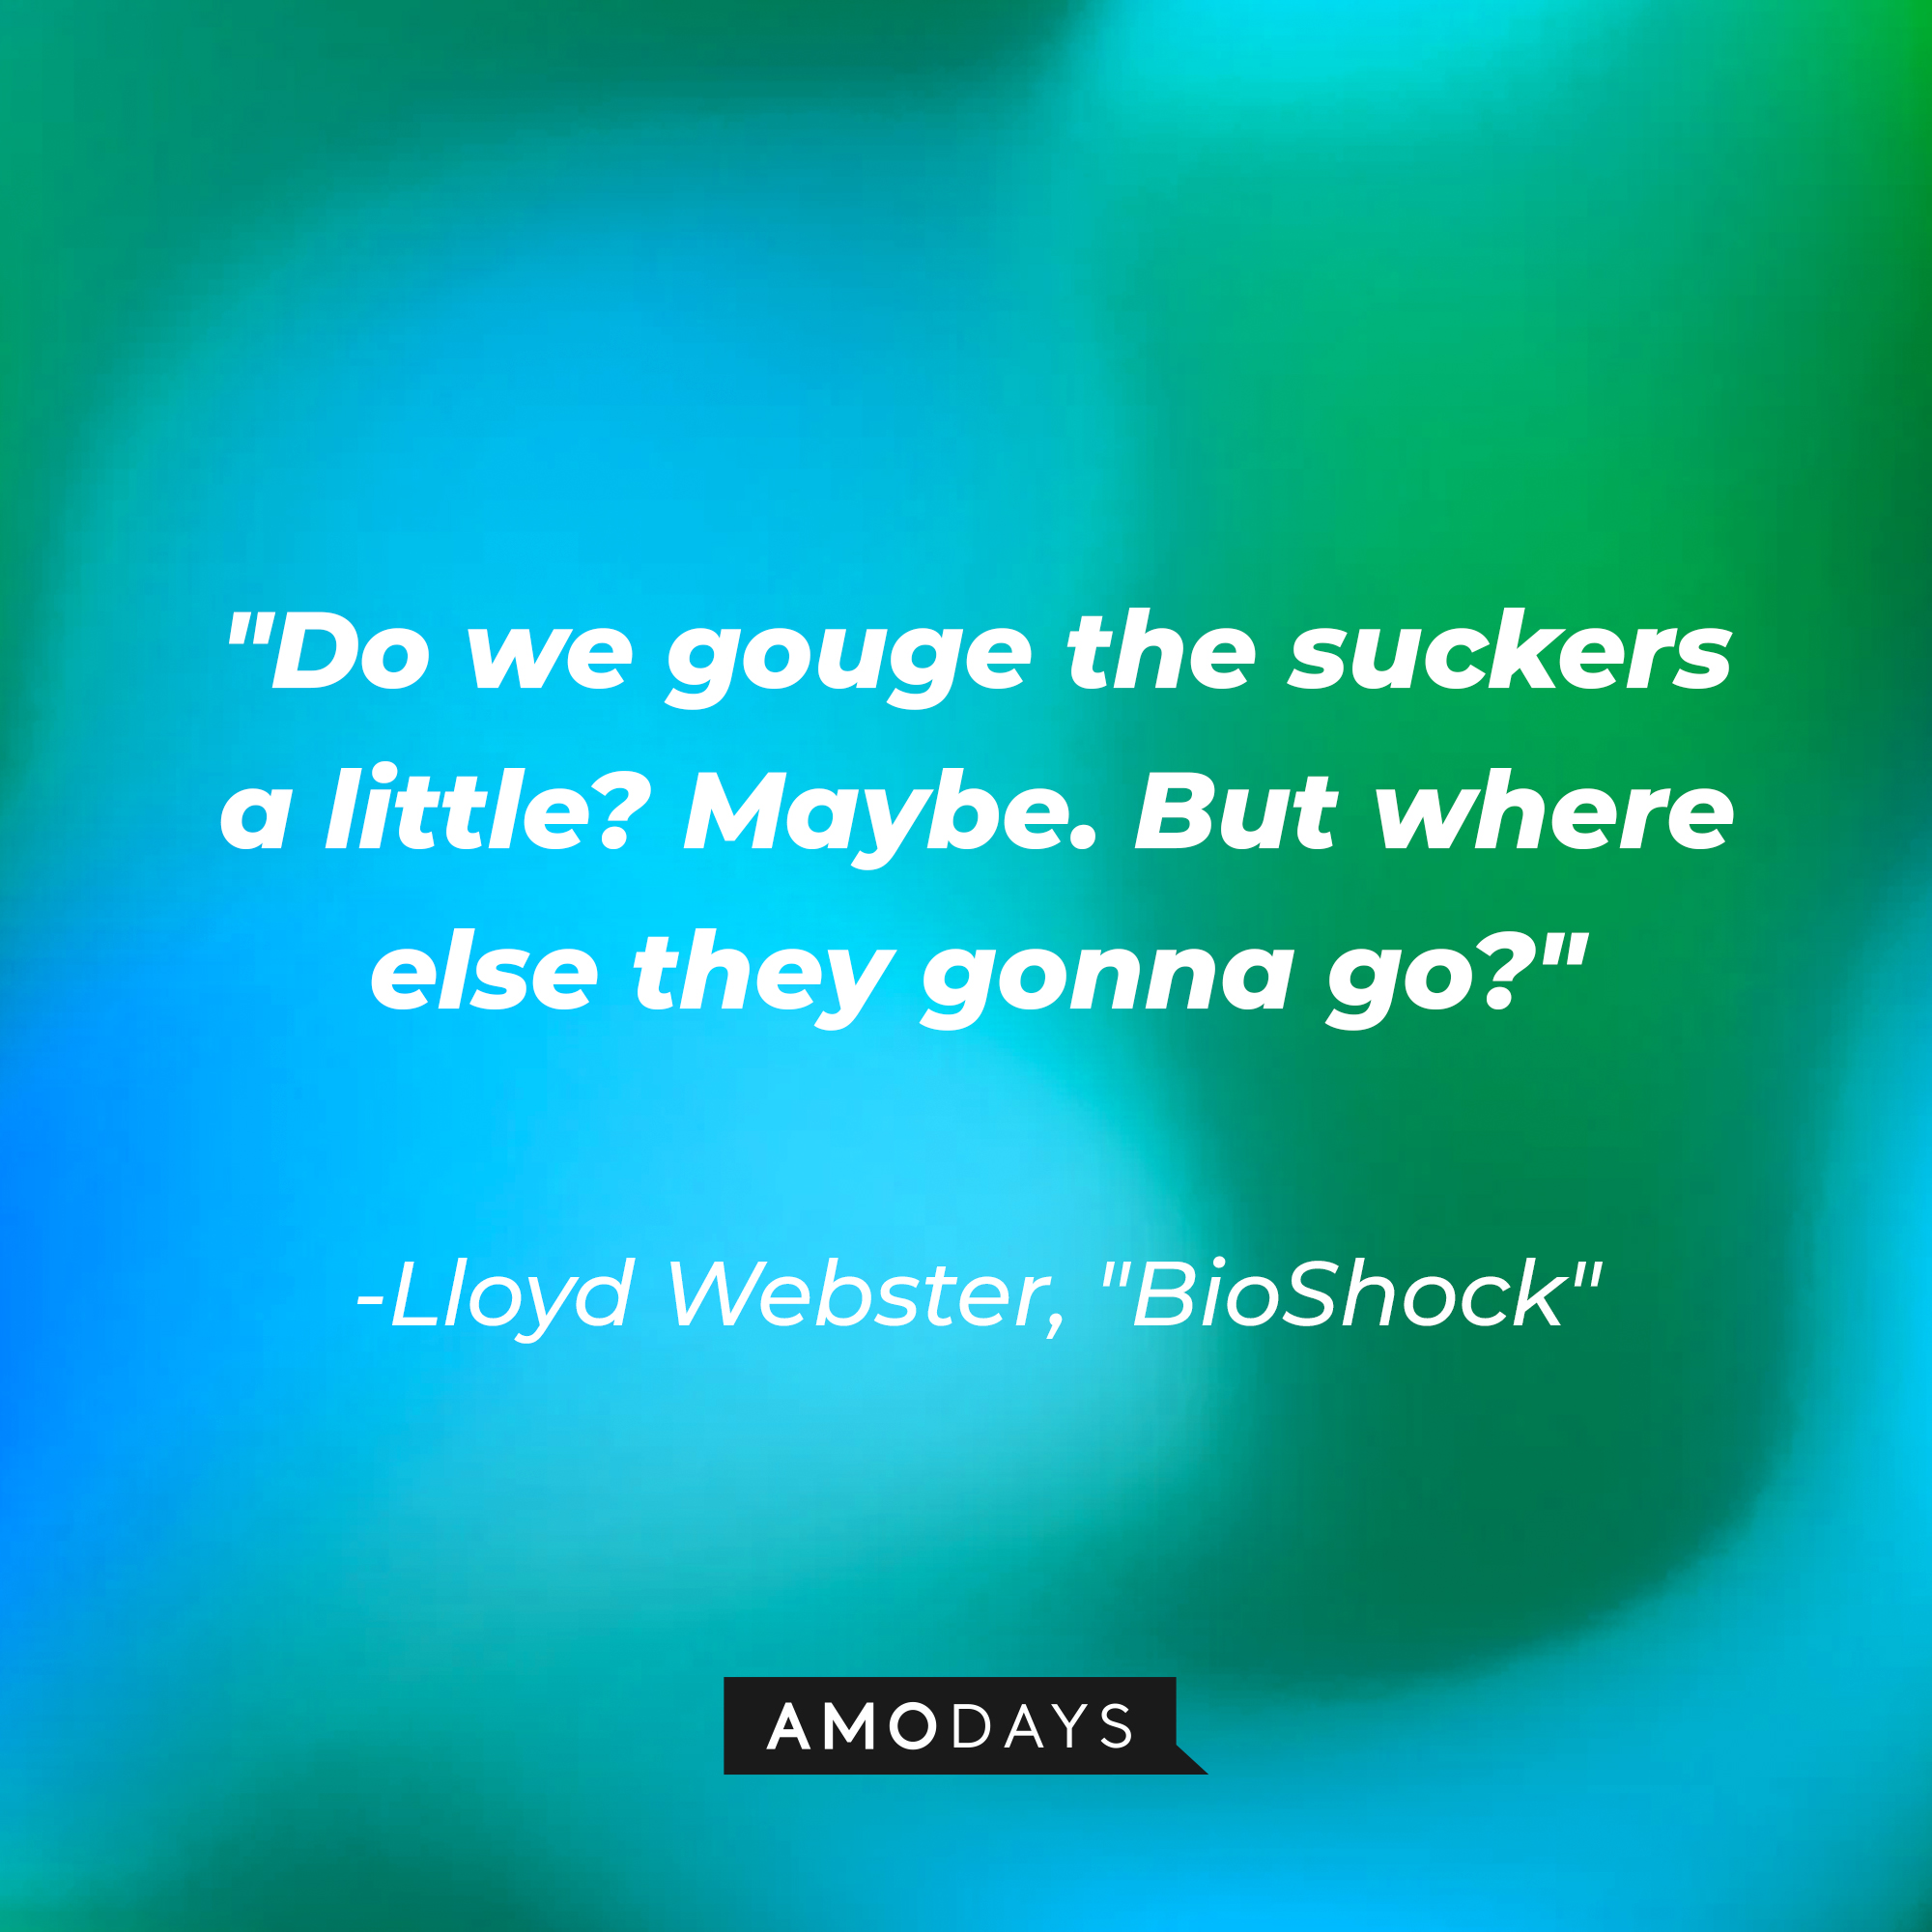 Lloyd Webster's quote from "BioShock:" "Do we gouge the suckers a little? Maybe. But where else they gonna go?" | Source: AmoDays